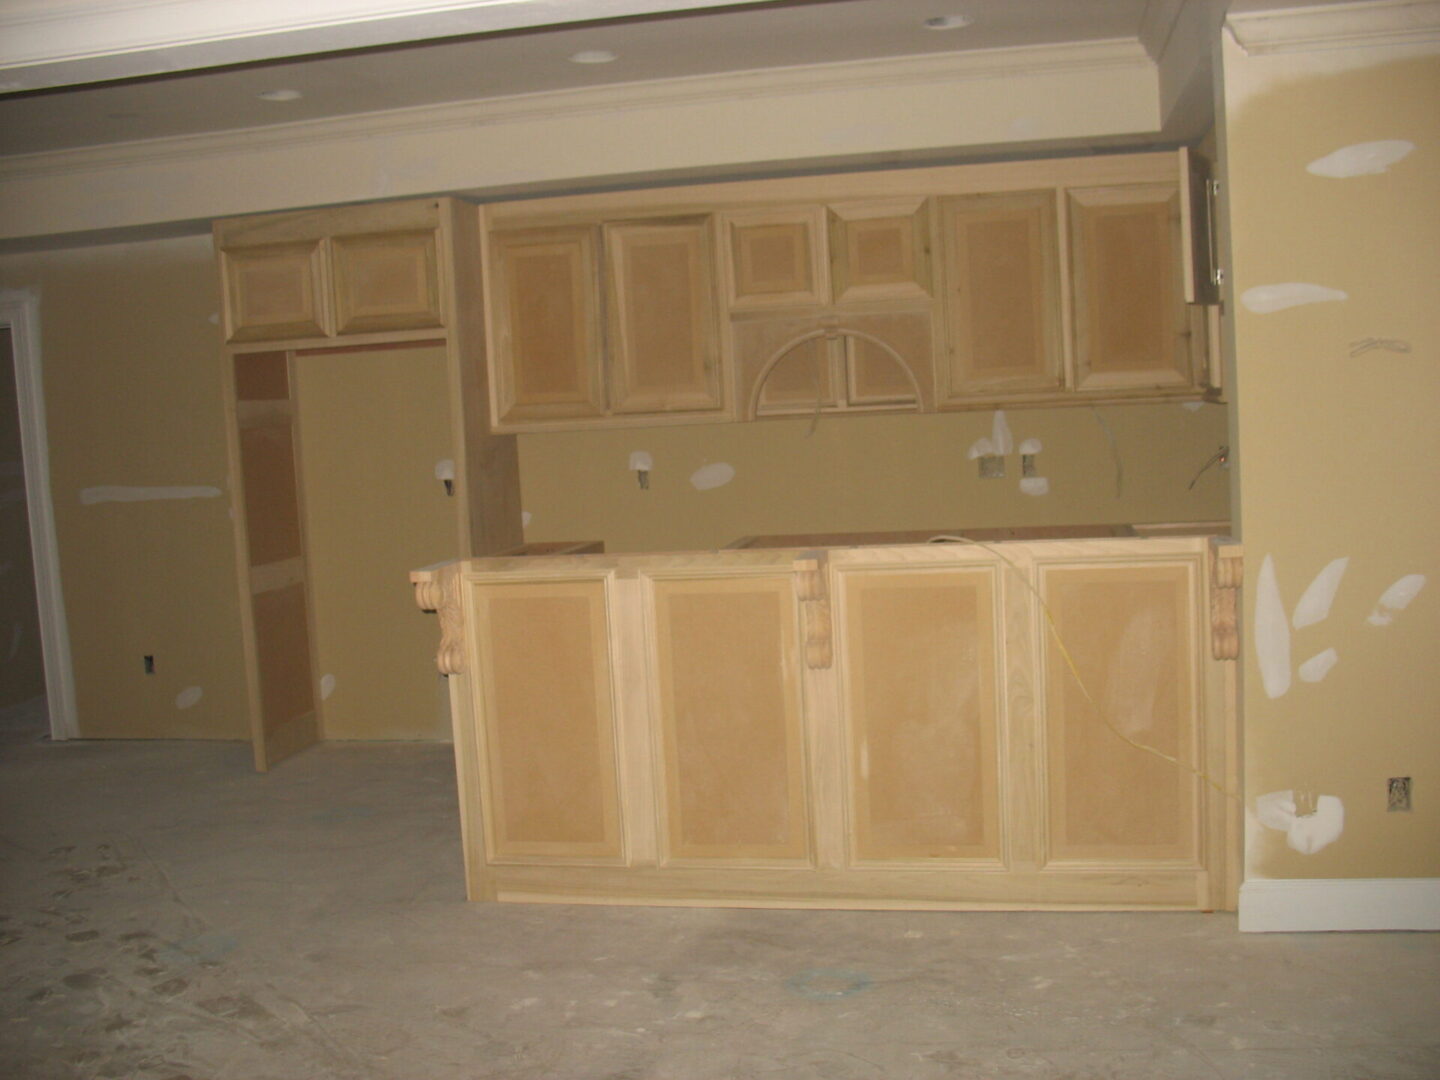 A room with many cabinets and doors in it